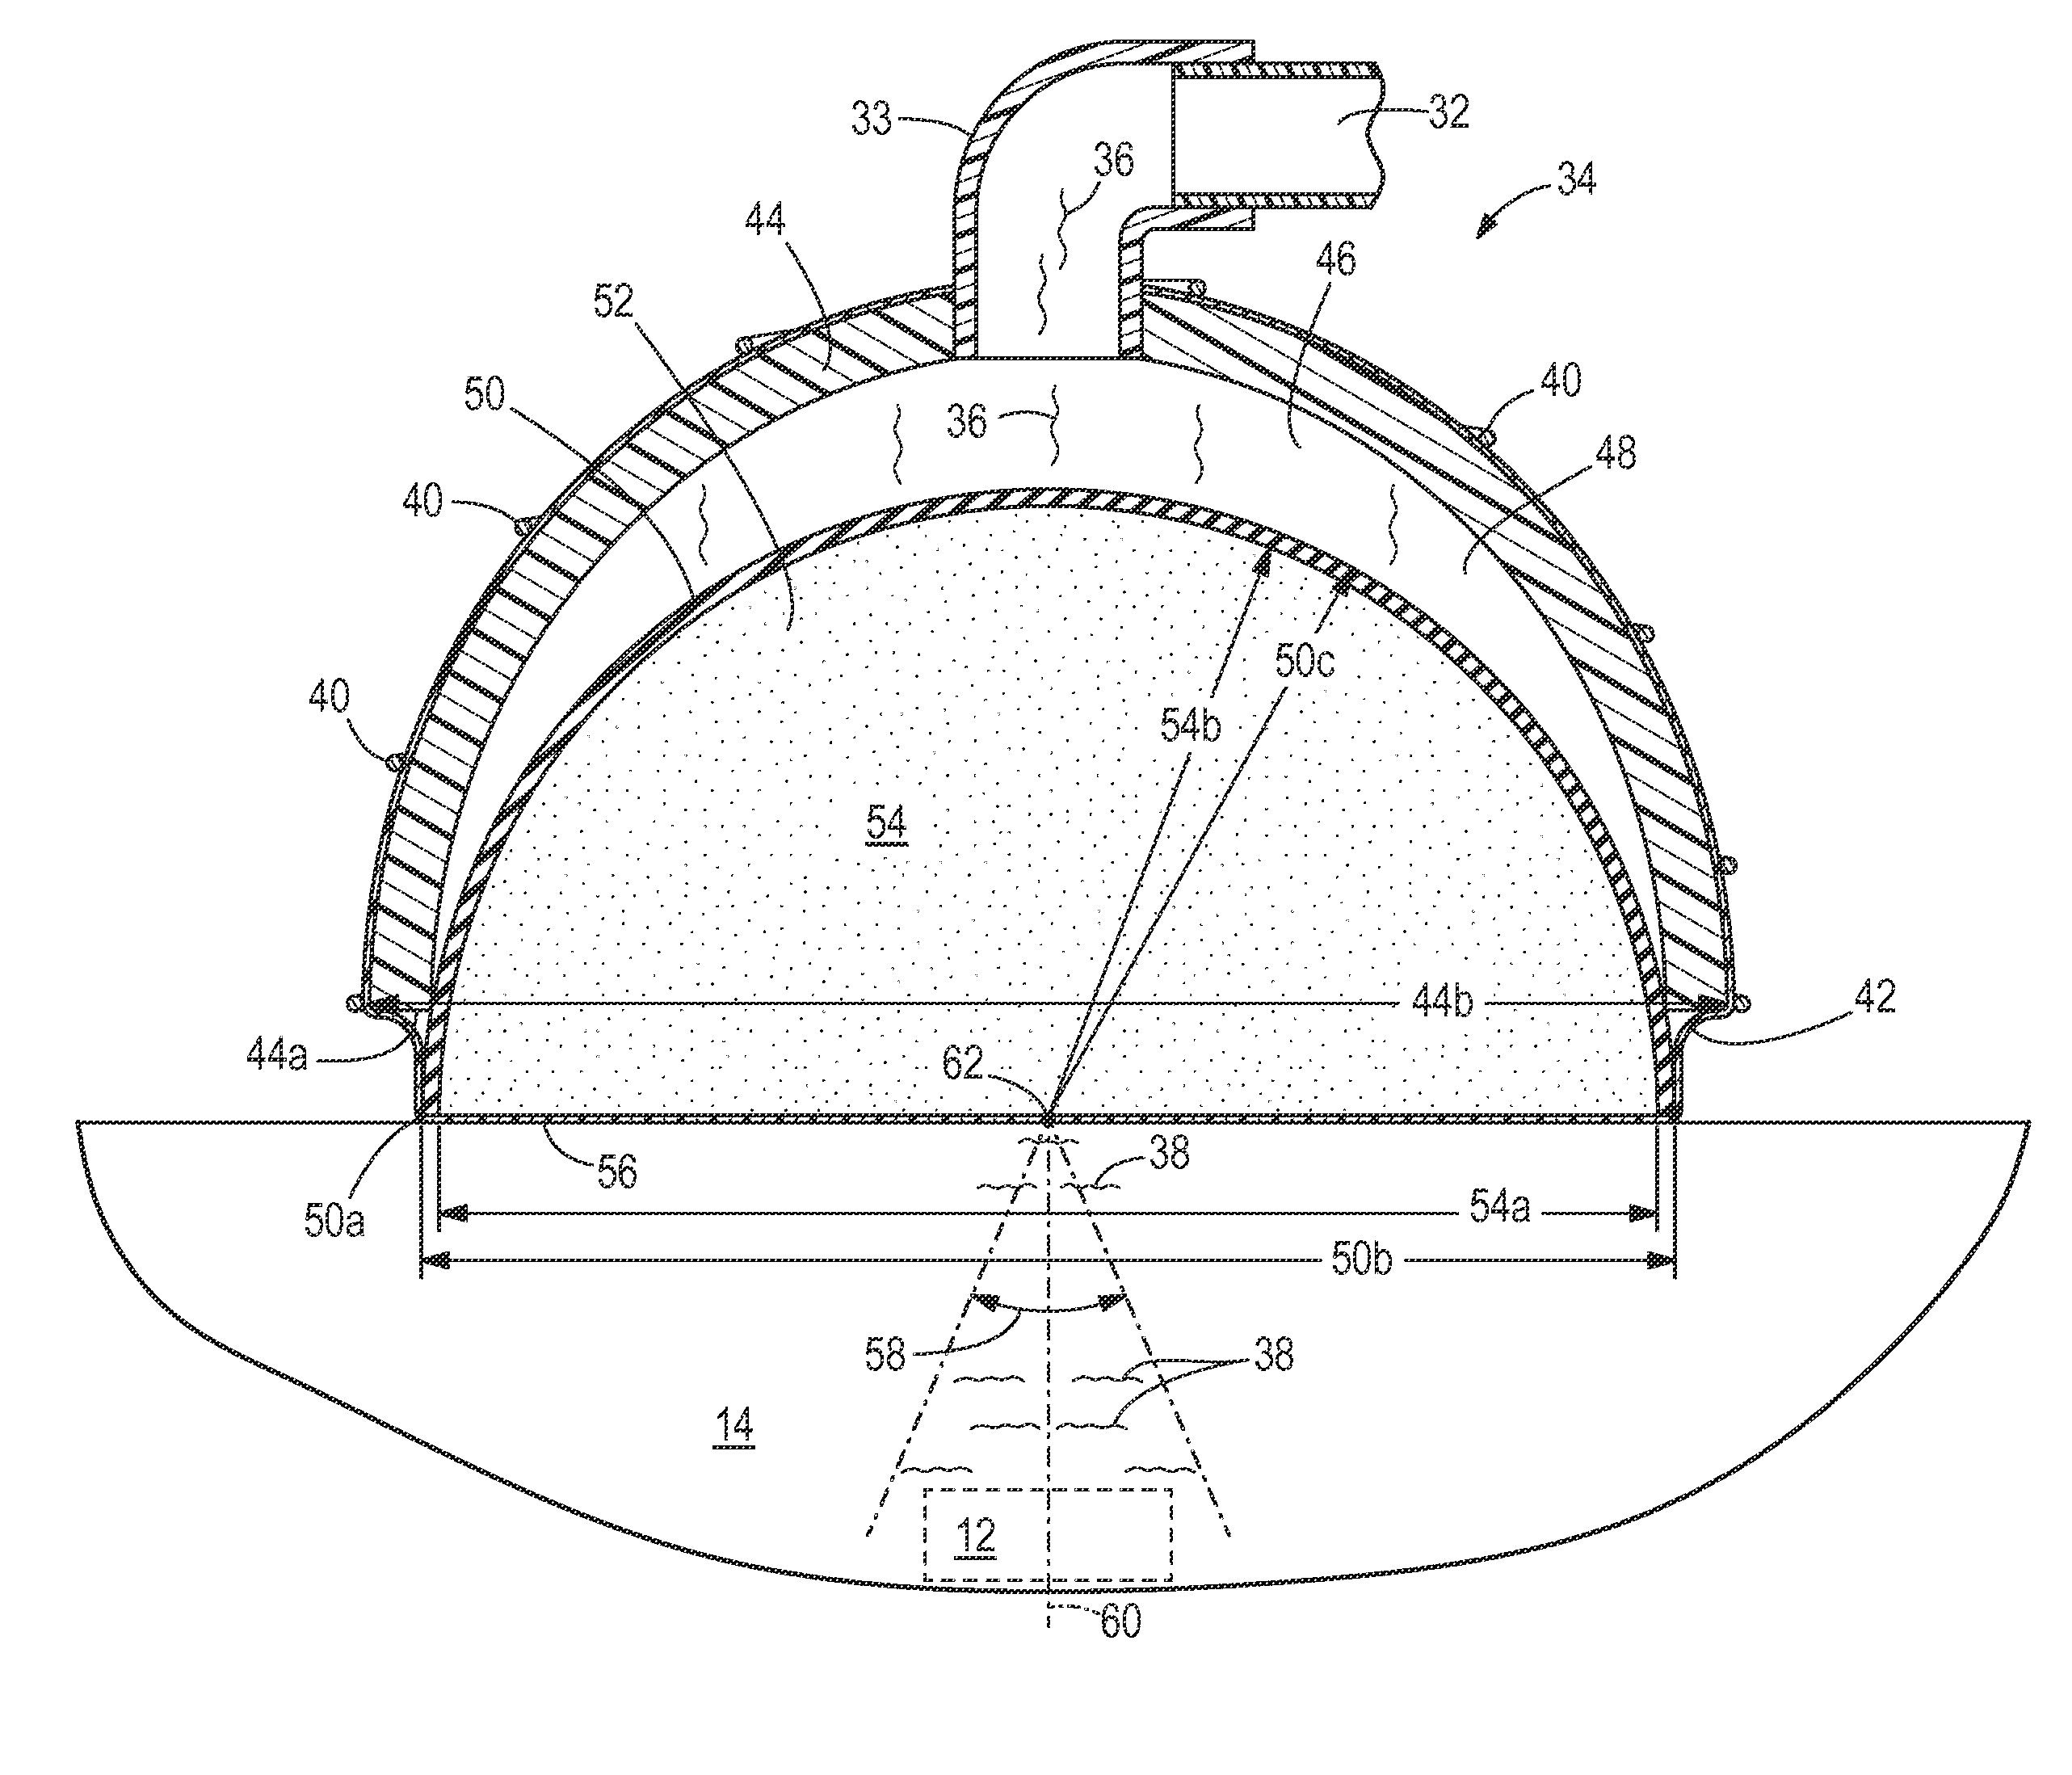 Curved Passive Acoustic Driver for Magnetic Resonance Elastography